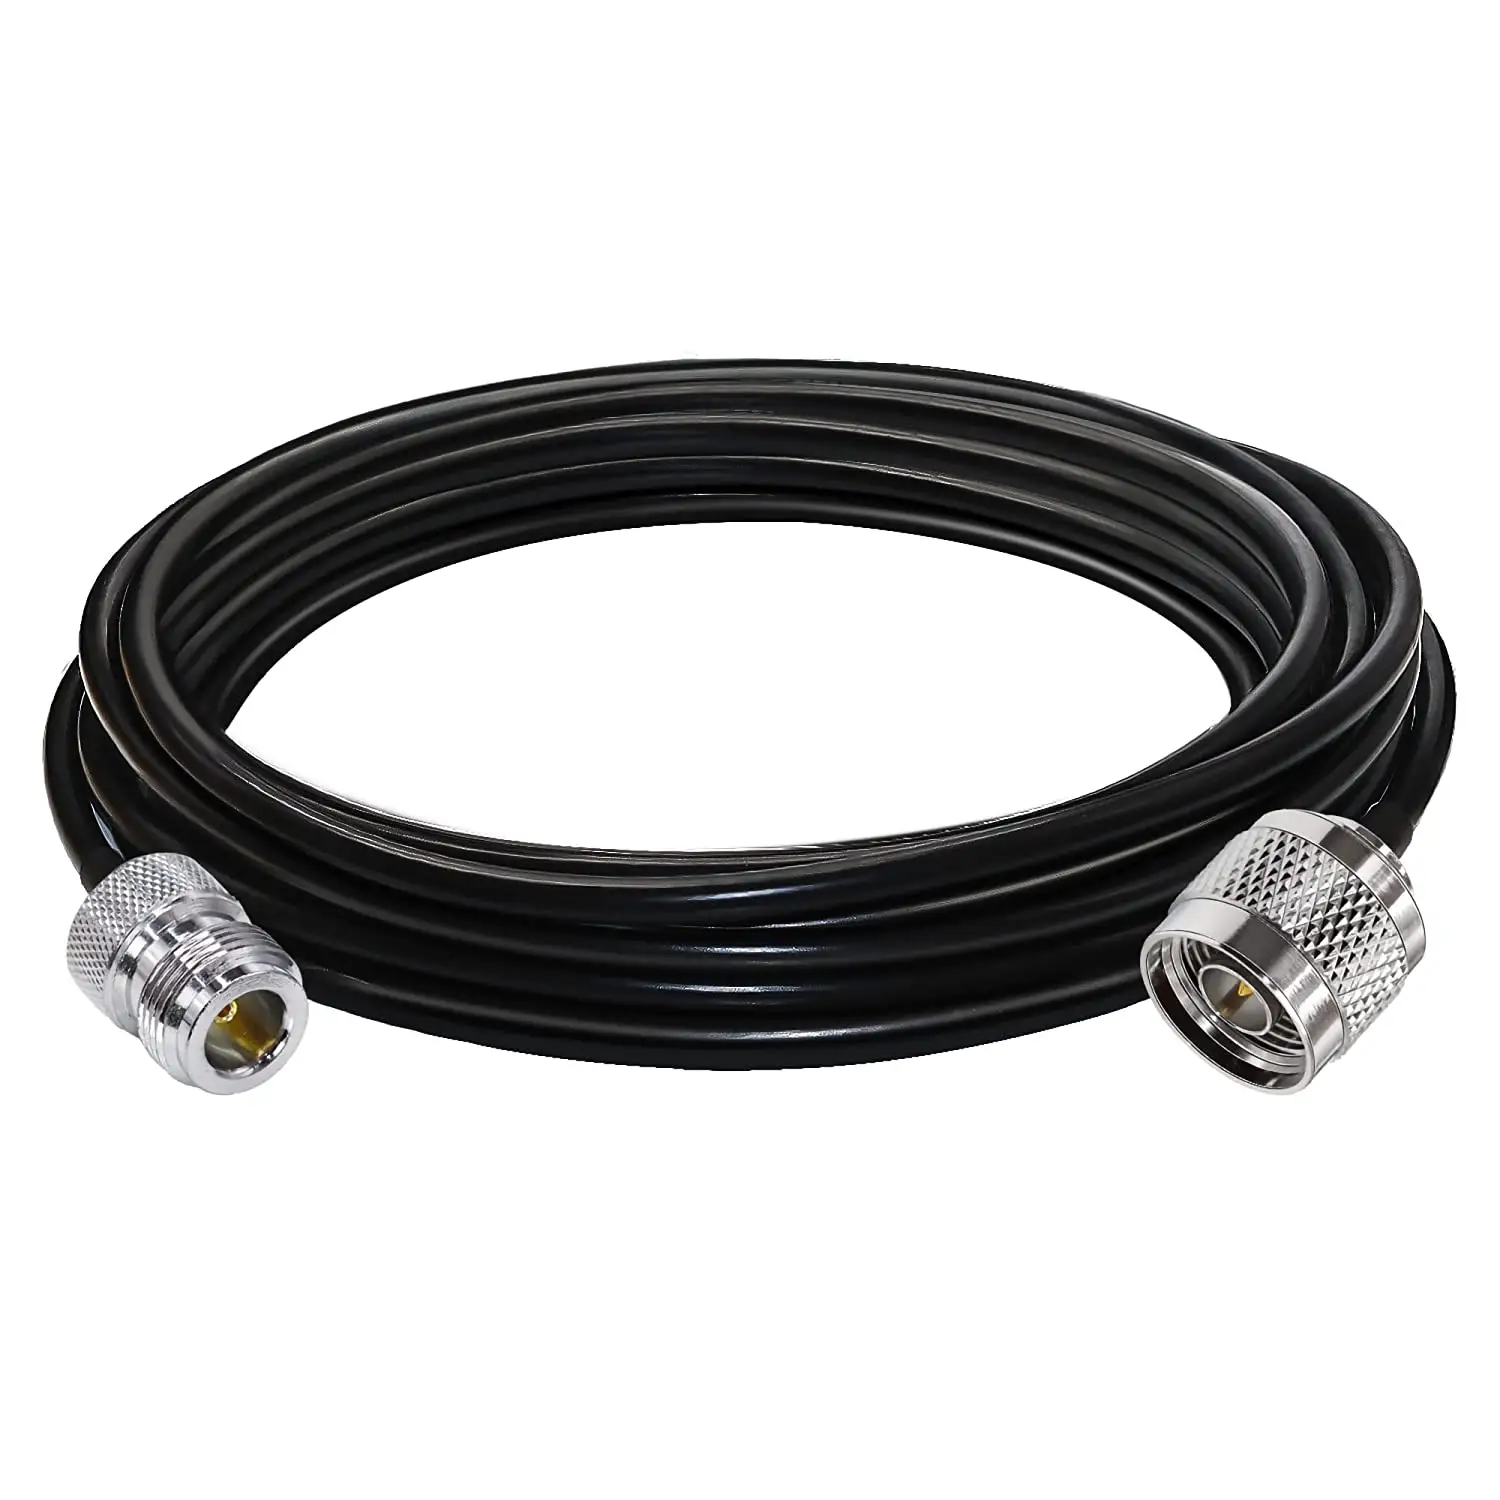 OEM Service N Male to N Female Low Loss RF Coaxial Cable RG58 Extension Cable for WiFi/Router/ 3G/ 4G/ LTE Antenna